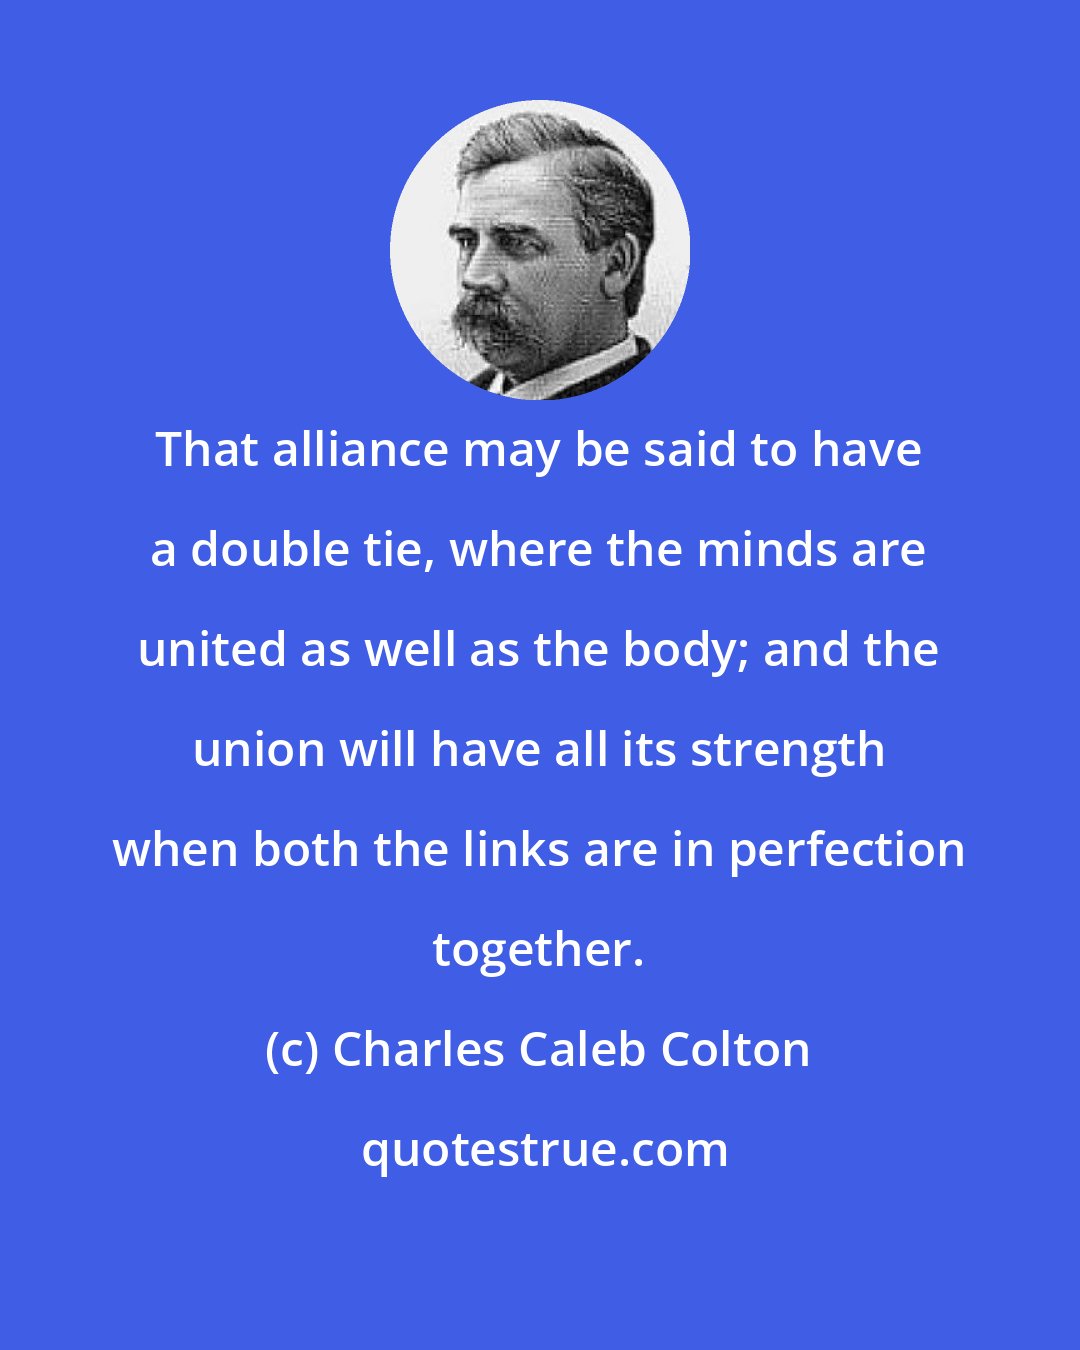 Charles Caleb Colton: That alliance may be said to have a double tie, where the minds are united as well as the body; and the union will have all its strength when both the links are in perfection together.